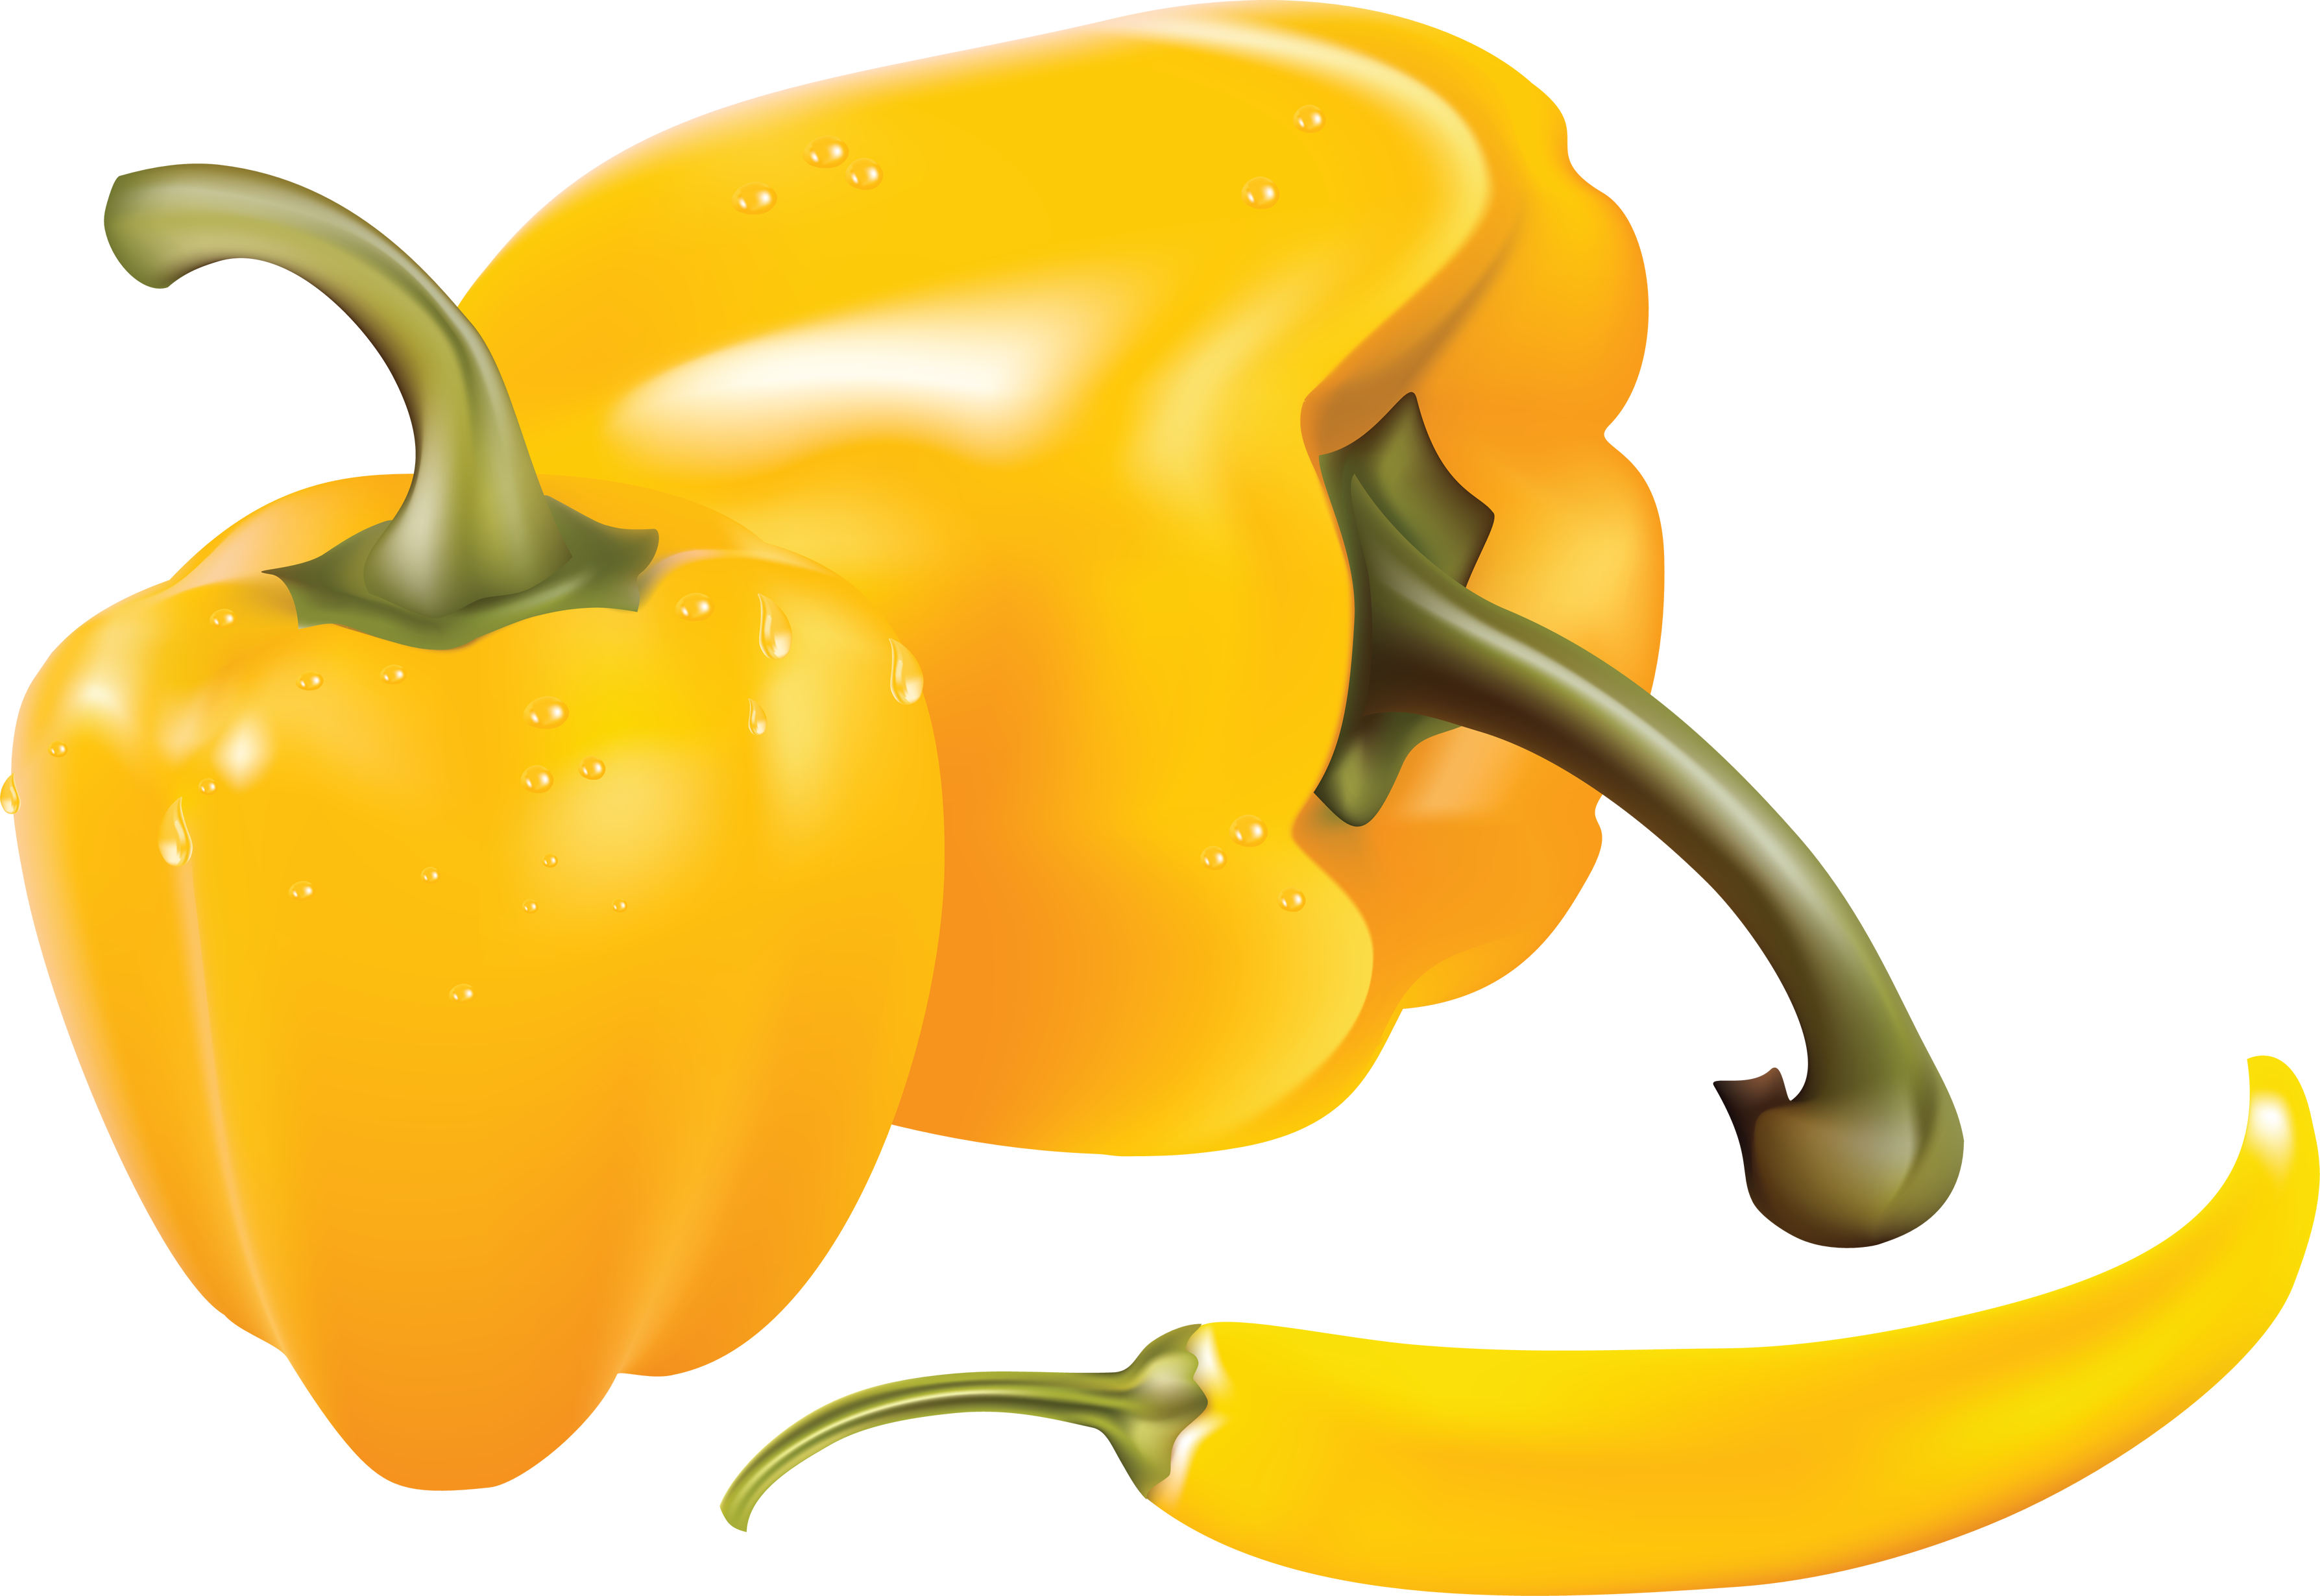 Png image free download. Pepper clipart pepper bottle